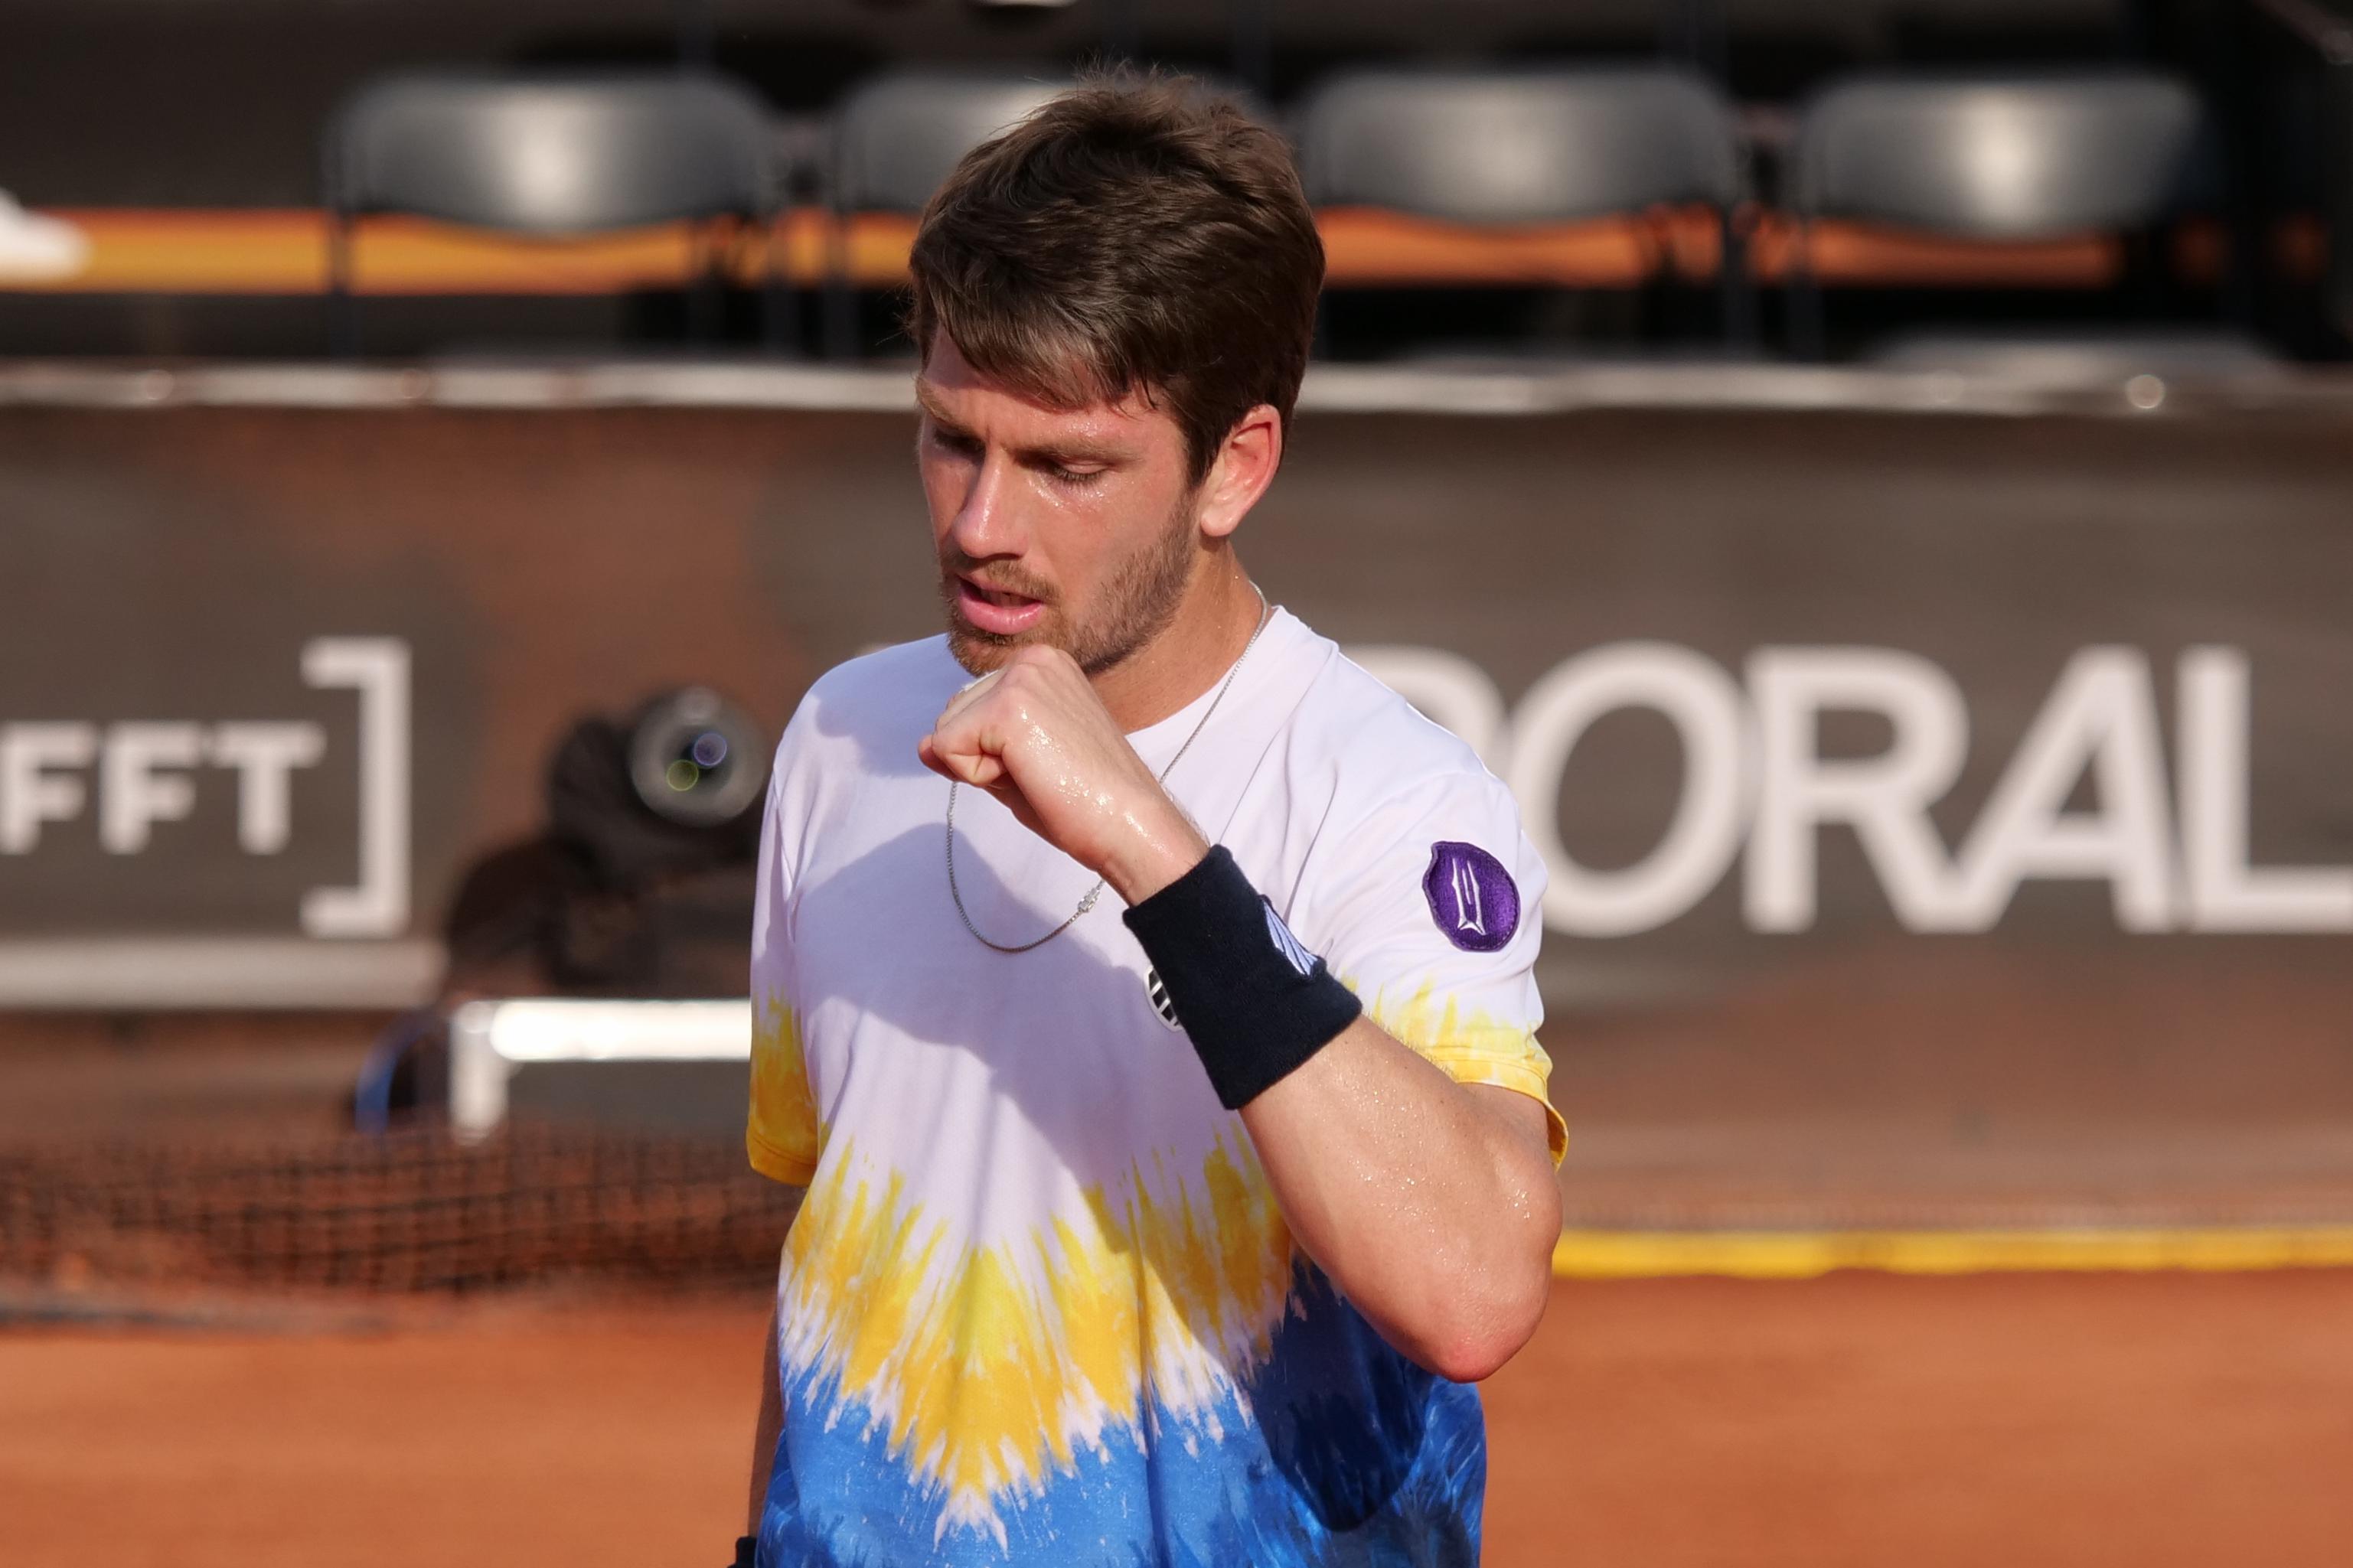 Lyon ATP Final: Cameron Norrie wins fourth career title in Lyon